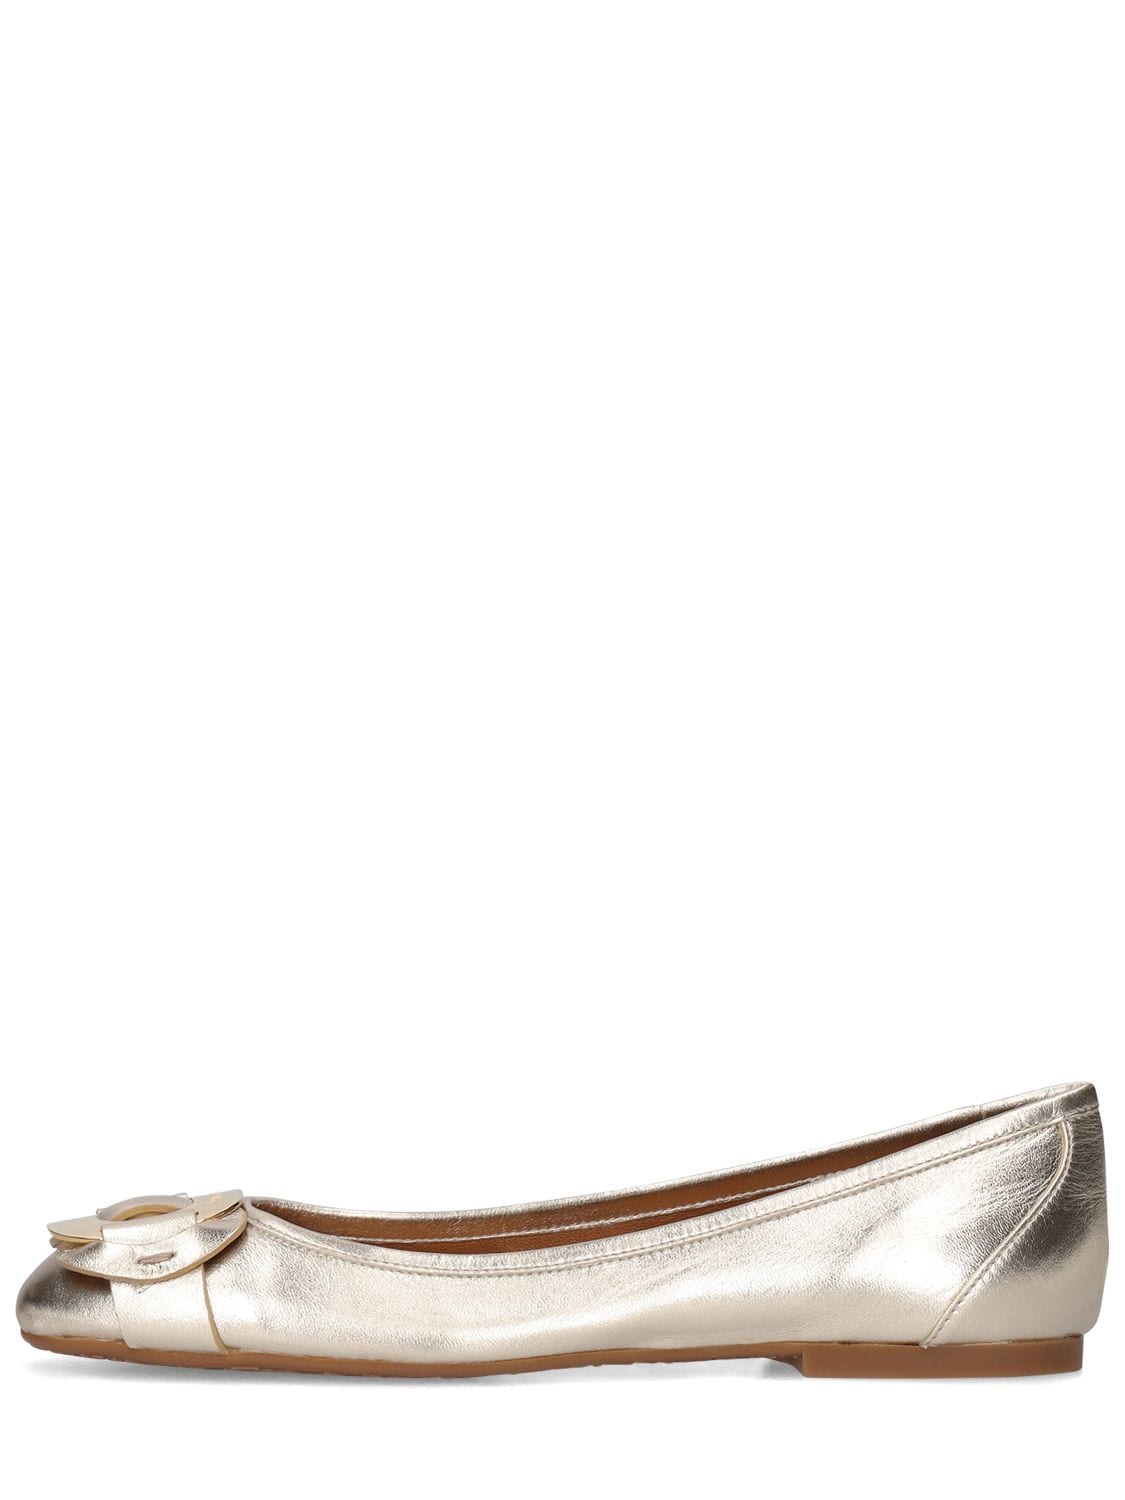 See By Chloé 10mm Chany Leather Ballerina Flats In Light Gold